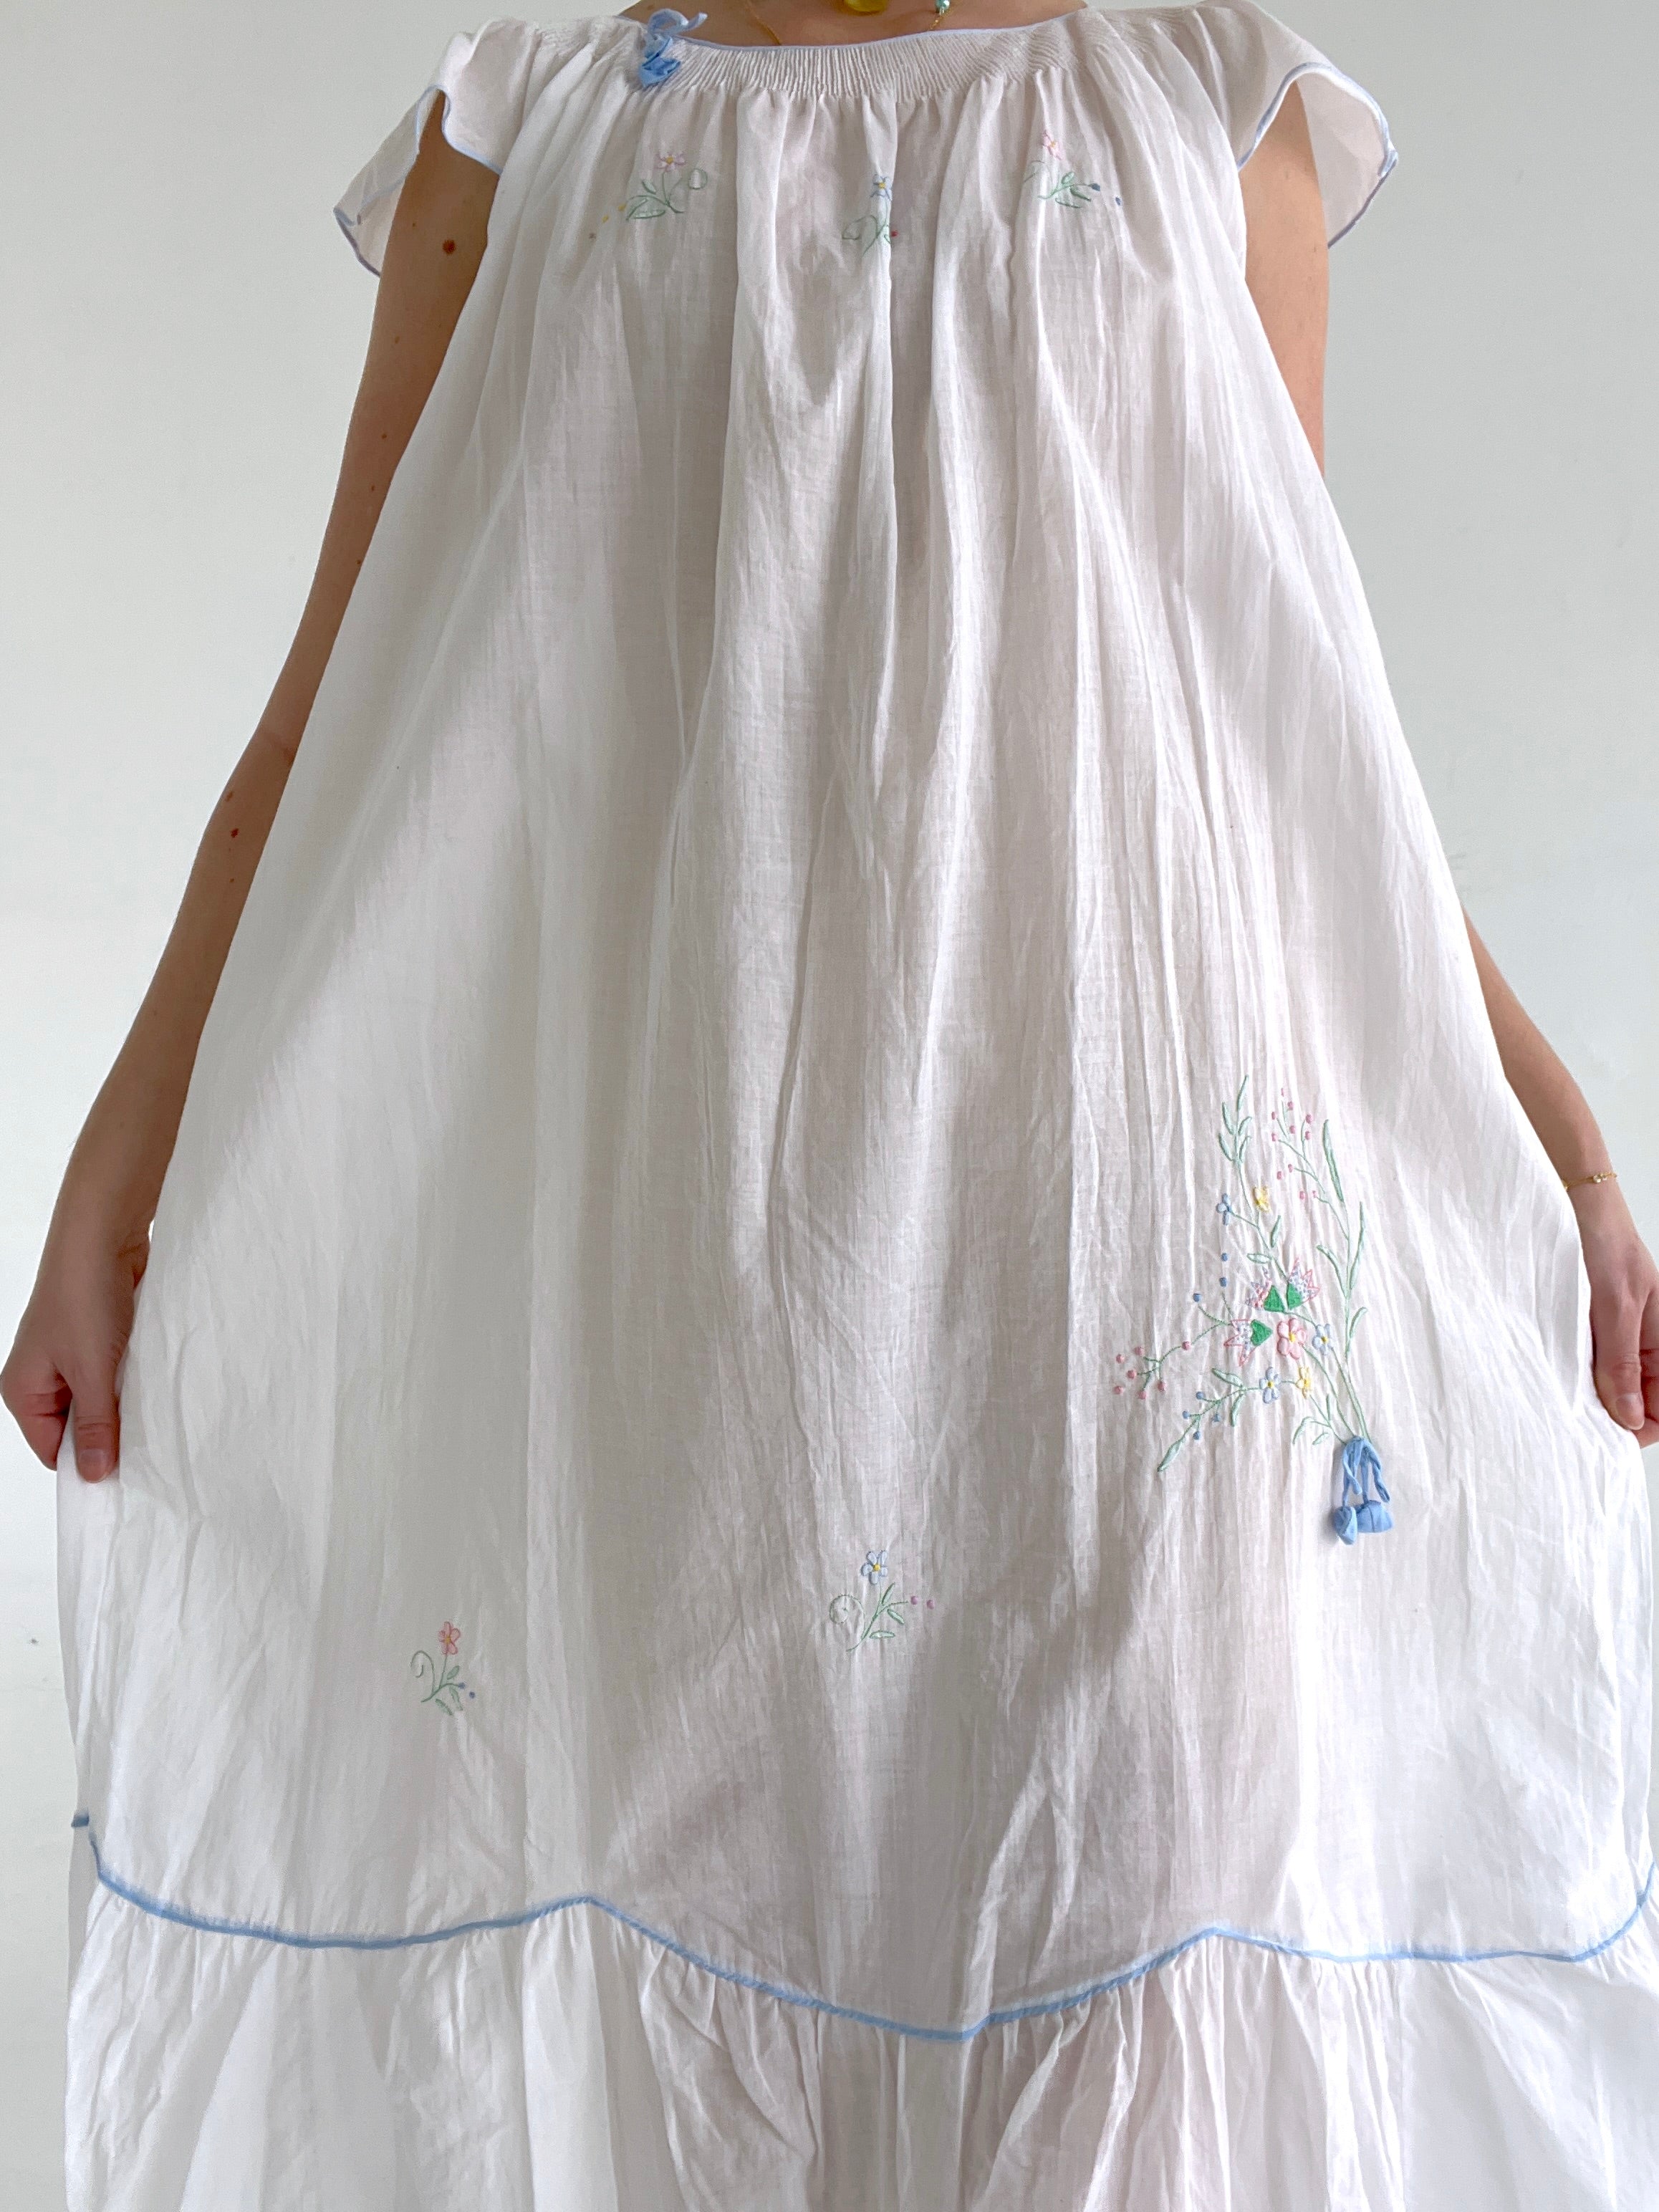 1950s White Cotton Dress with Multicolor Floral Embroidery